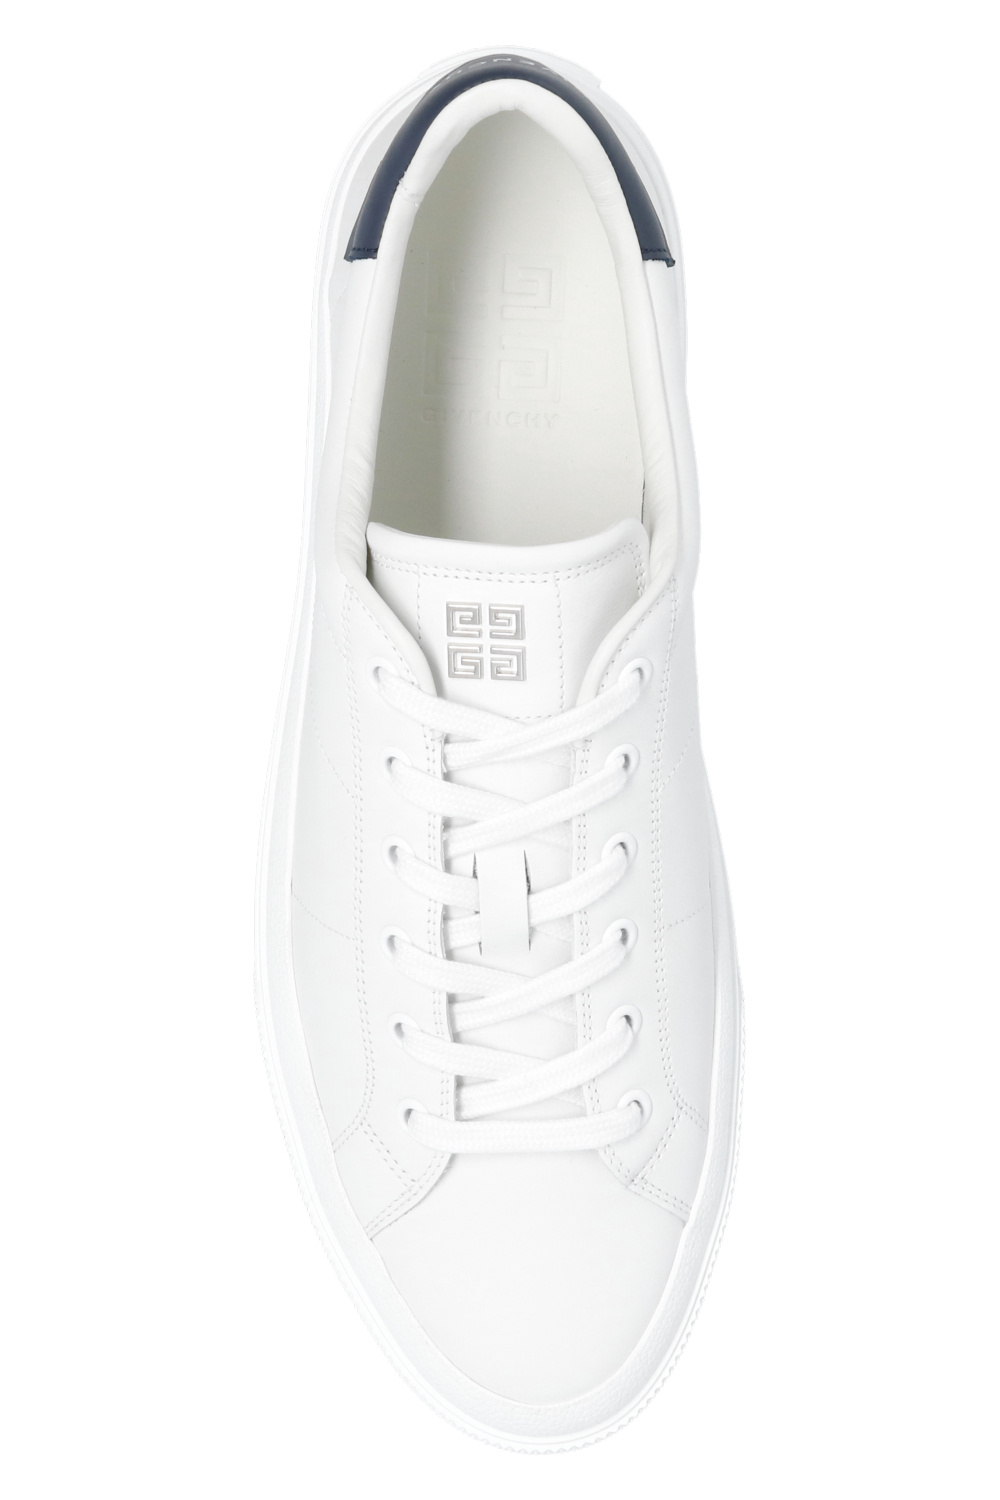 Givenchy ‘City Light’ sneakers